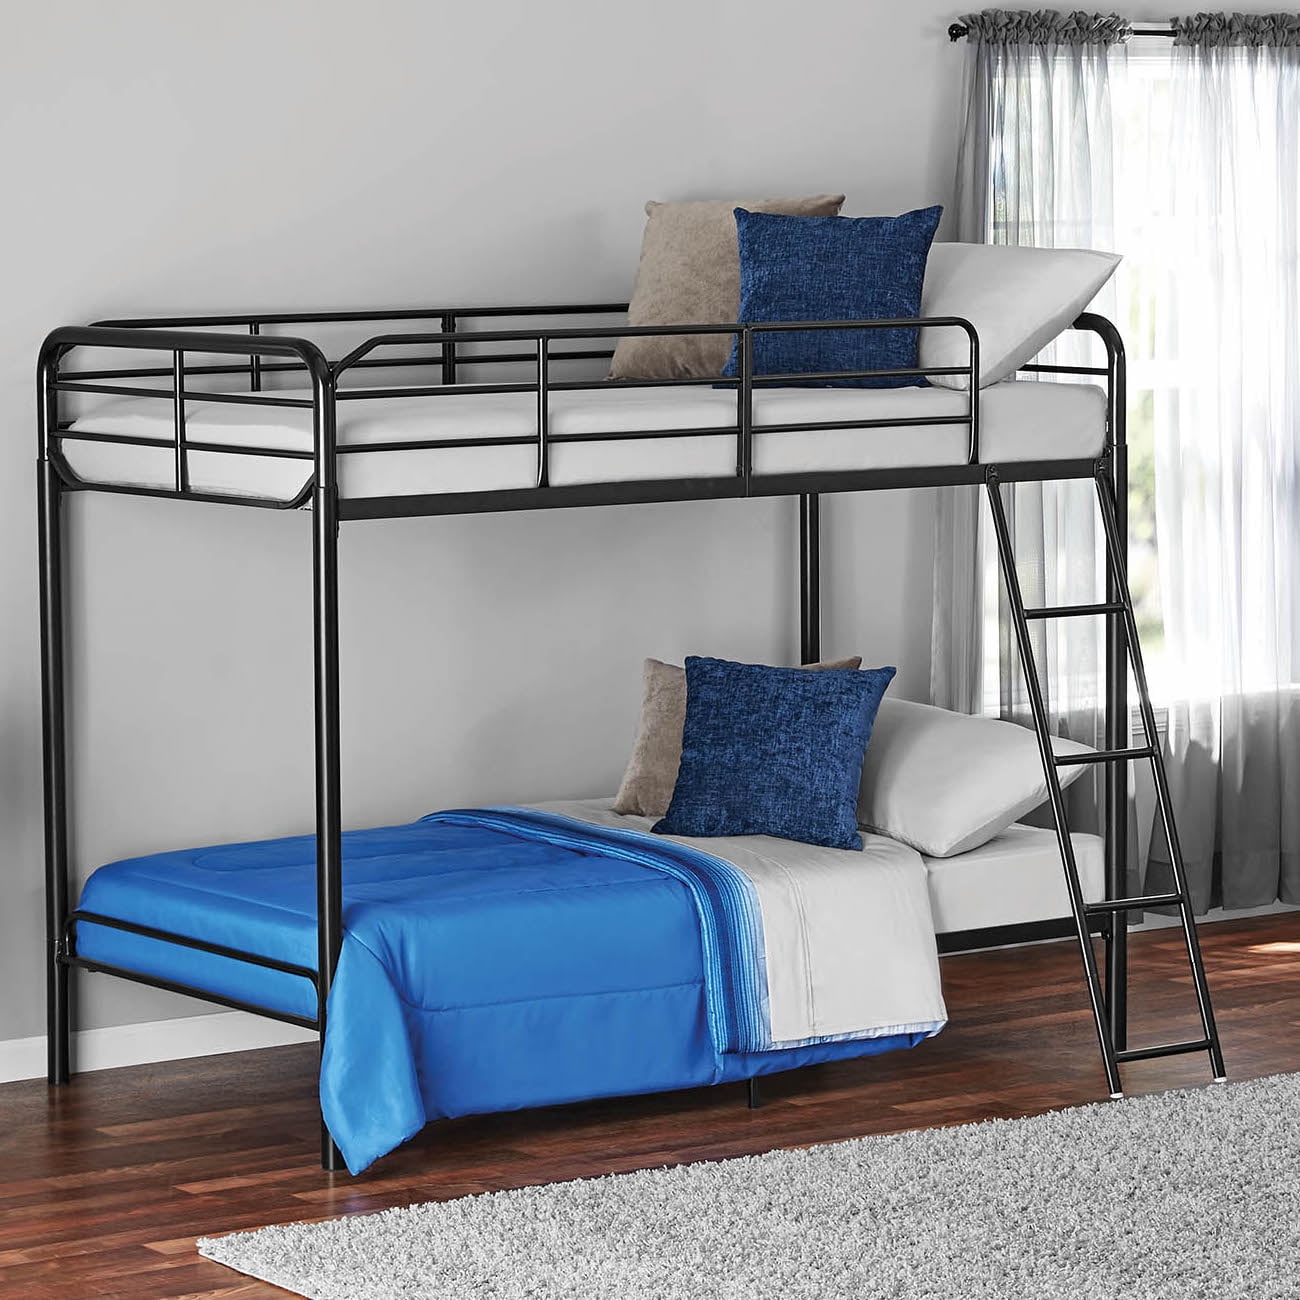 Mainstays Twin Over Metal Bunk Bed, How Much Weight Can A Bunk Bed Hold